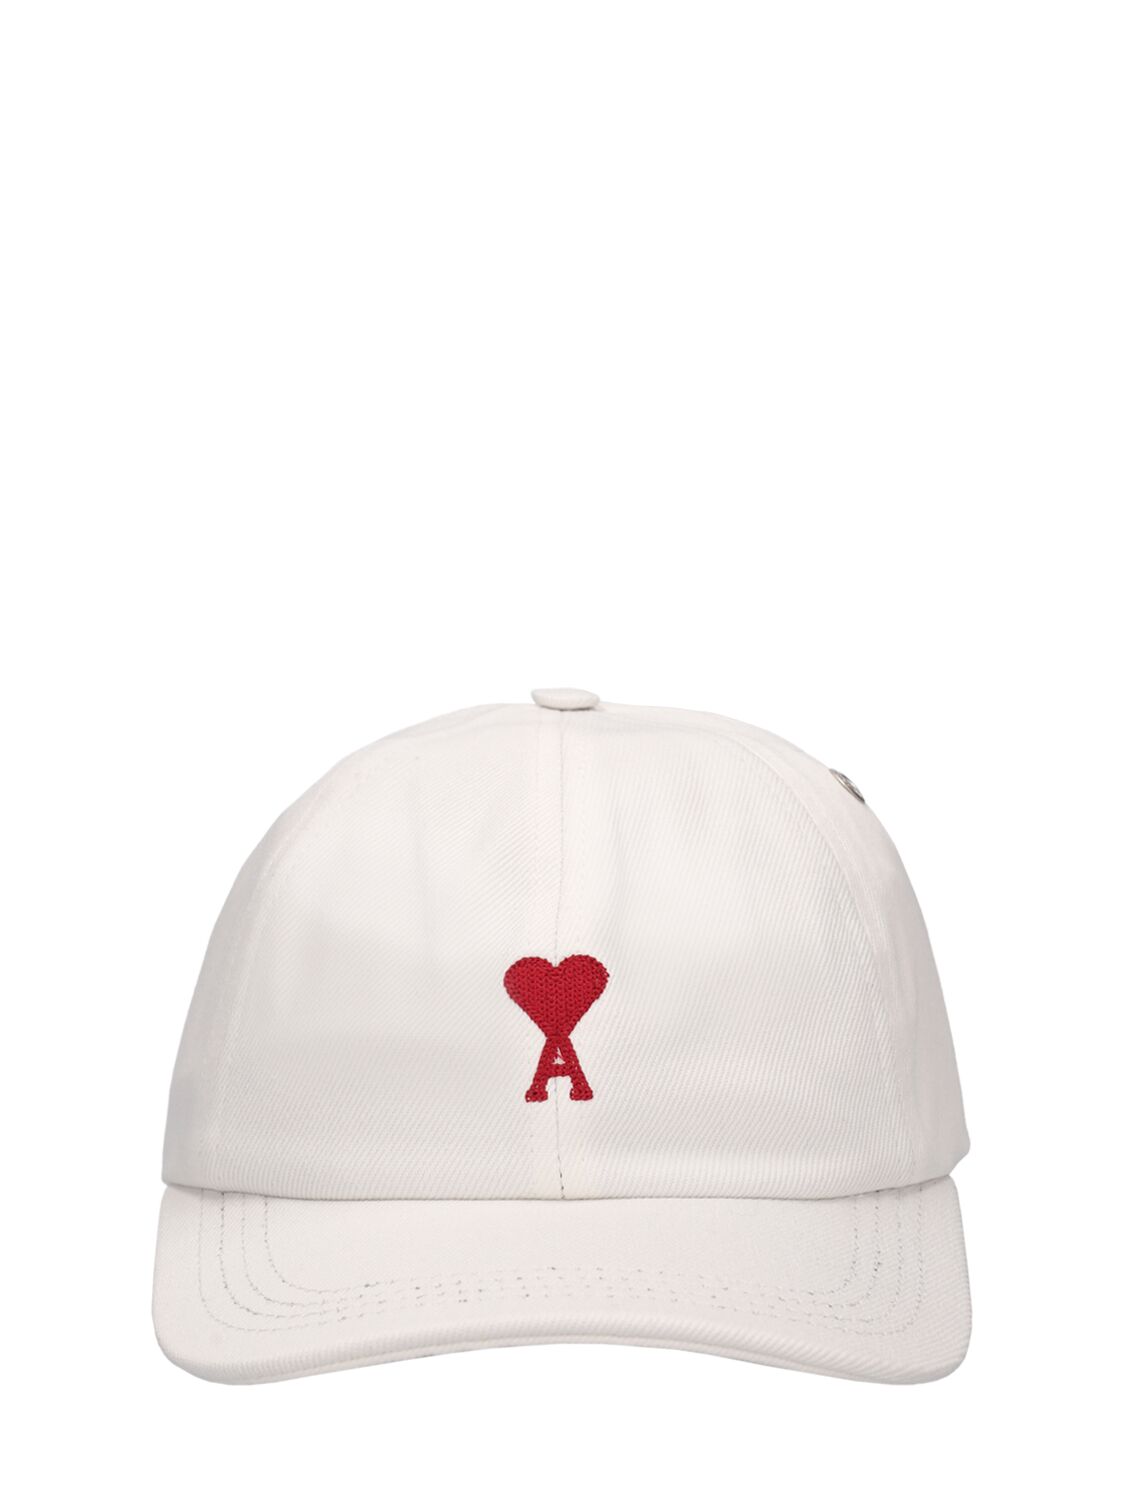 Image of Adc Embroidery Cotton Cap